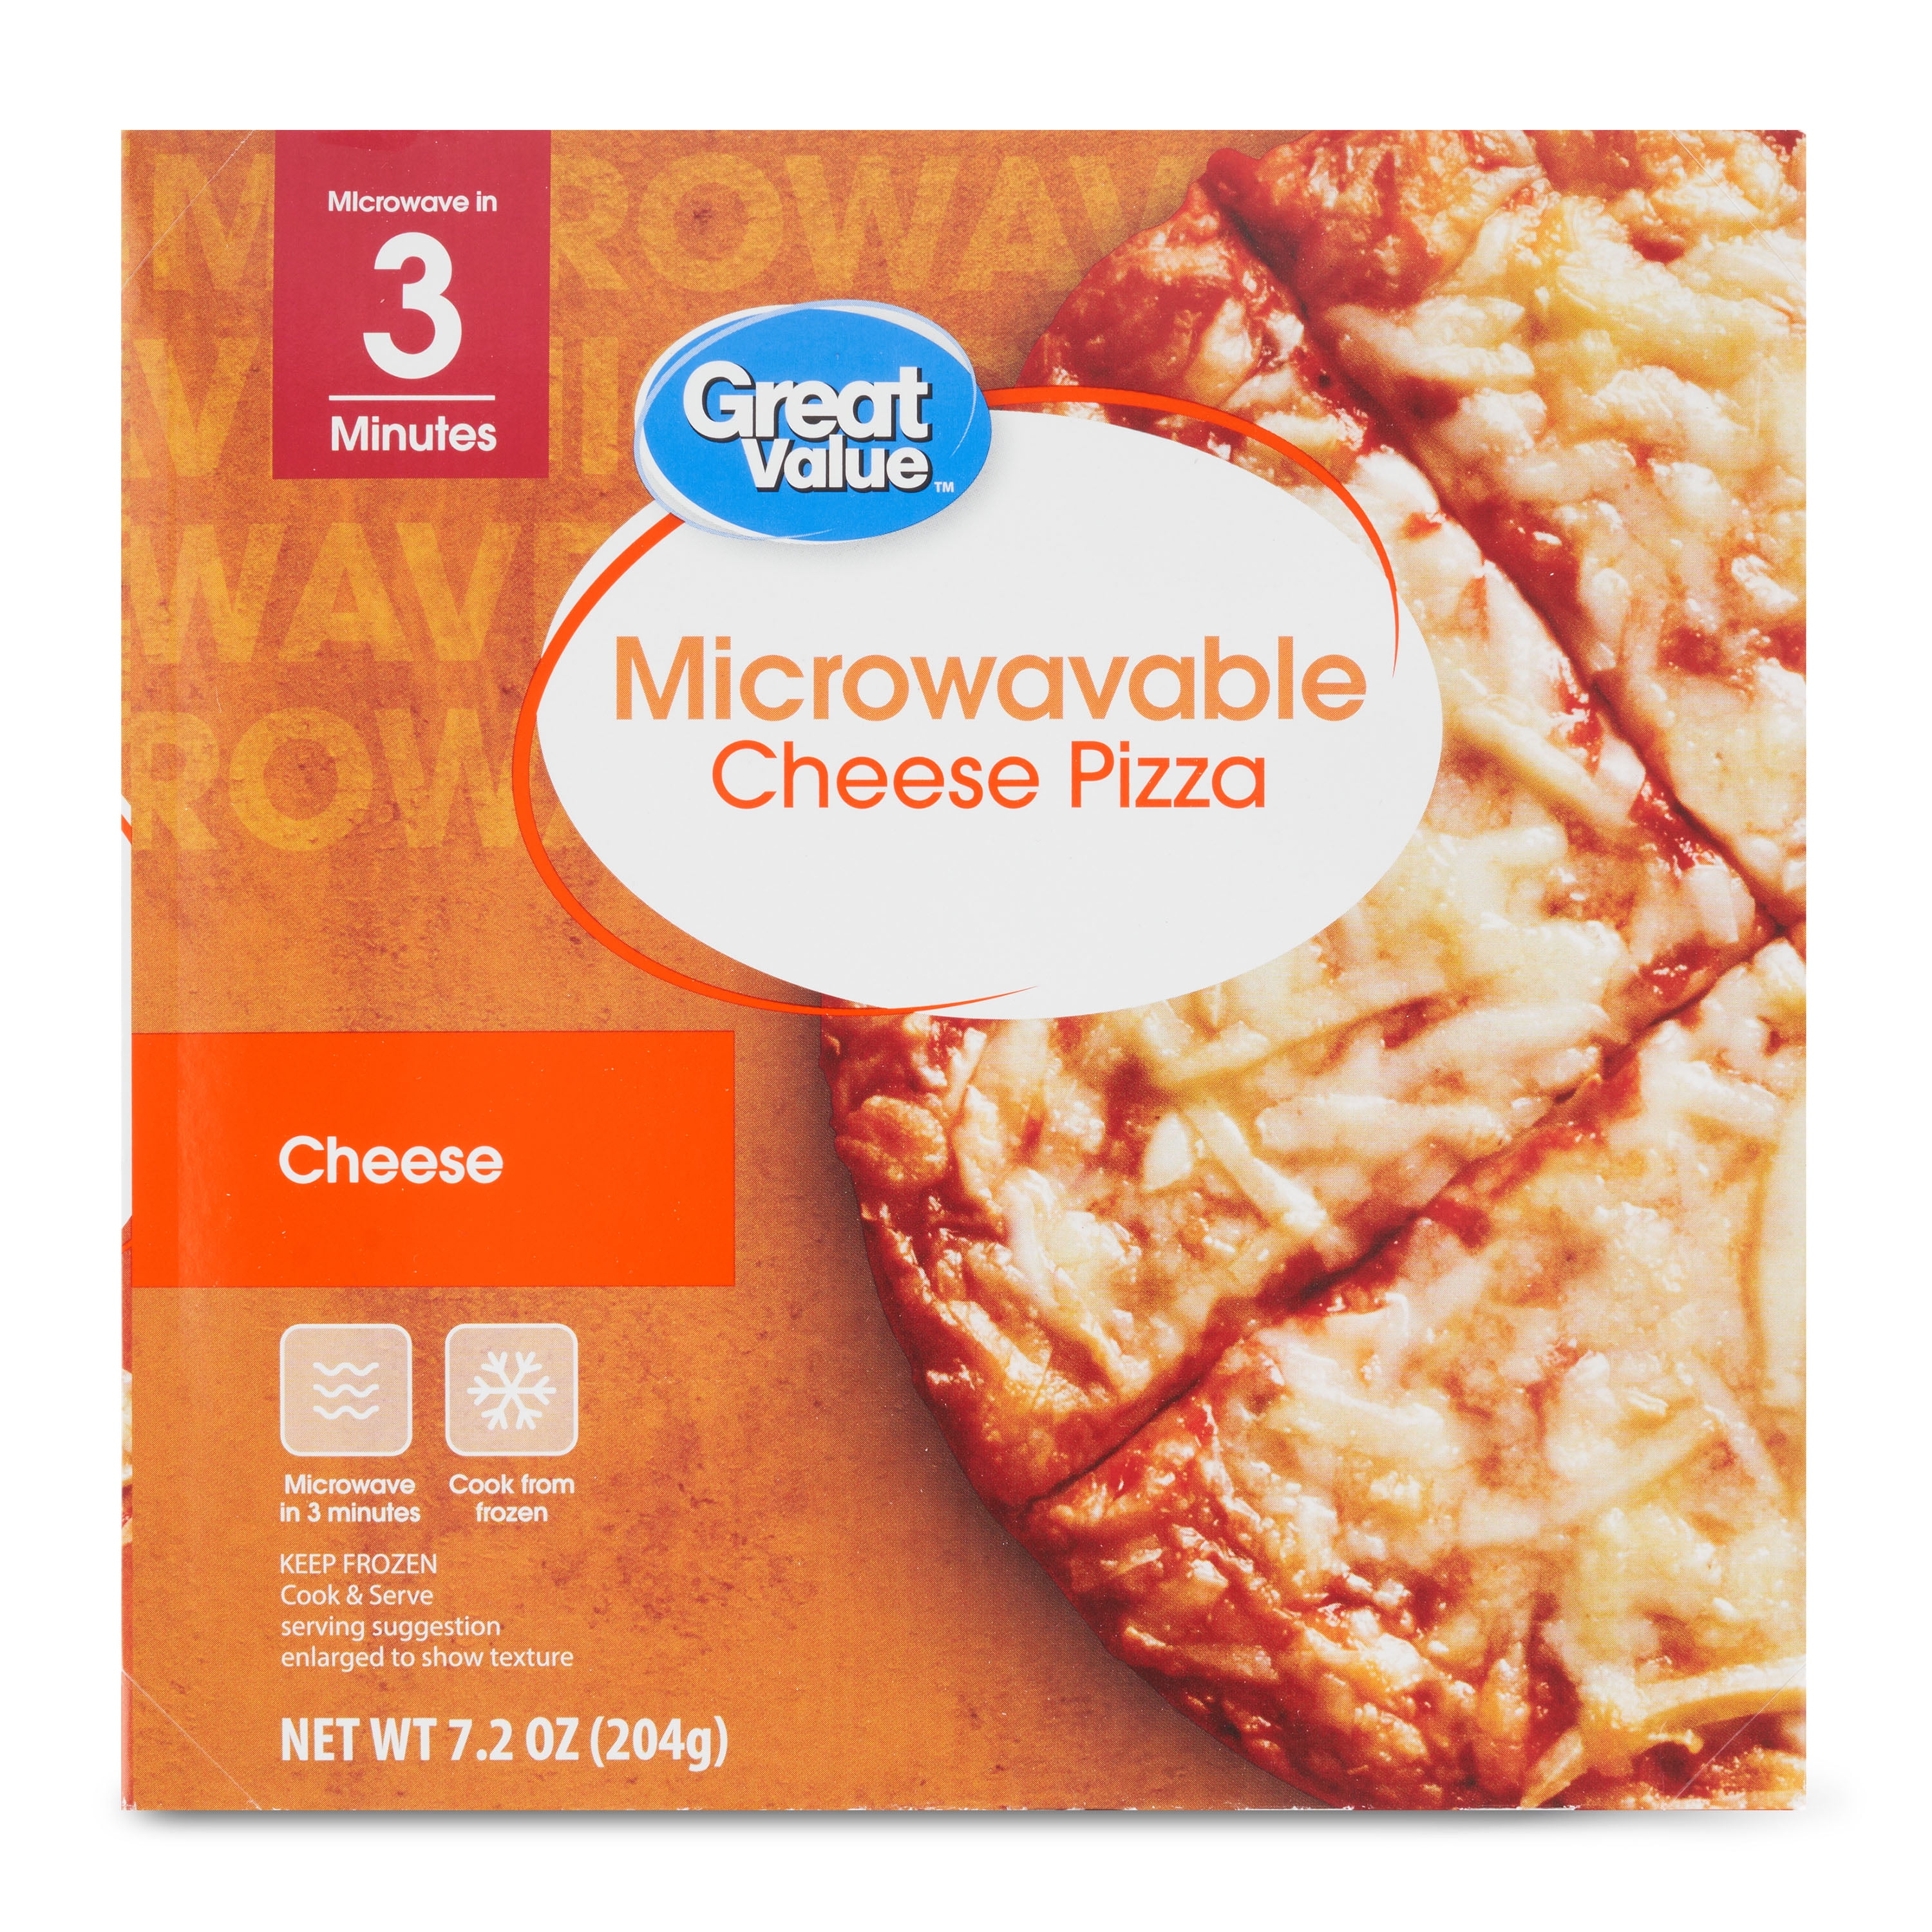 Great Value Classic Crust Cheese Microwave Frozen Pizza 7.2oz